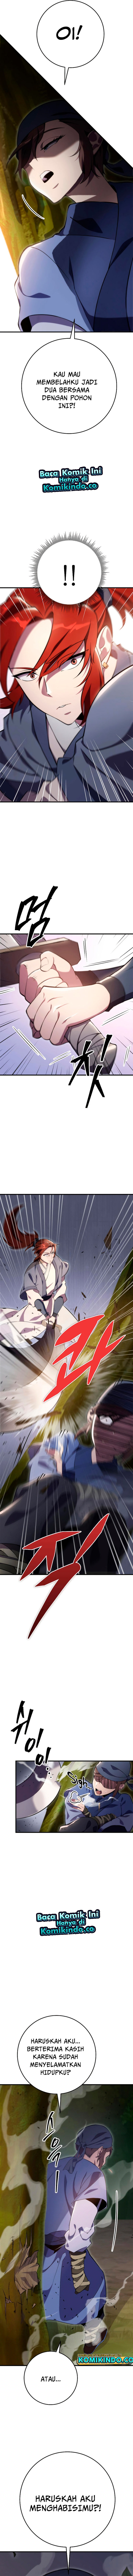 Heavenly Inquisition Sword Chapter 45